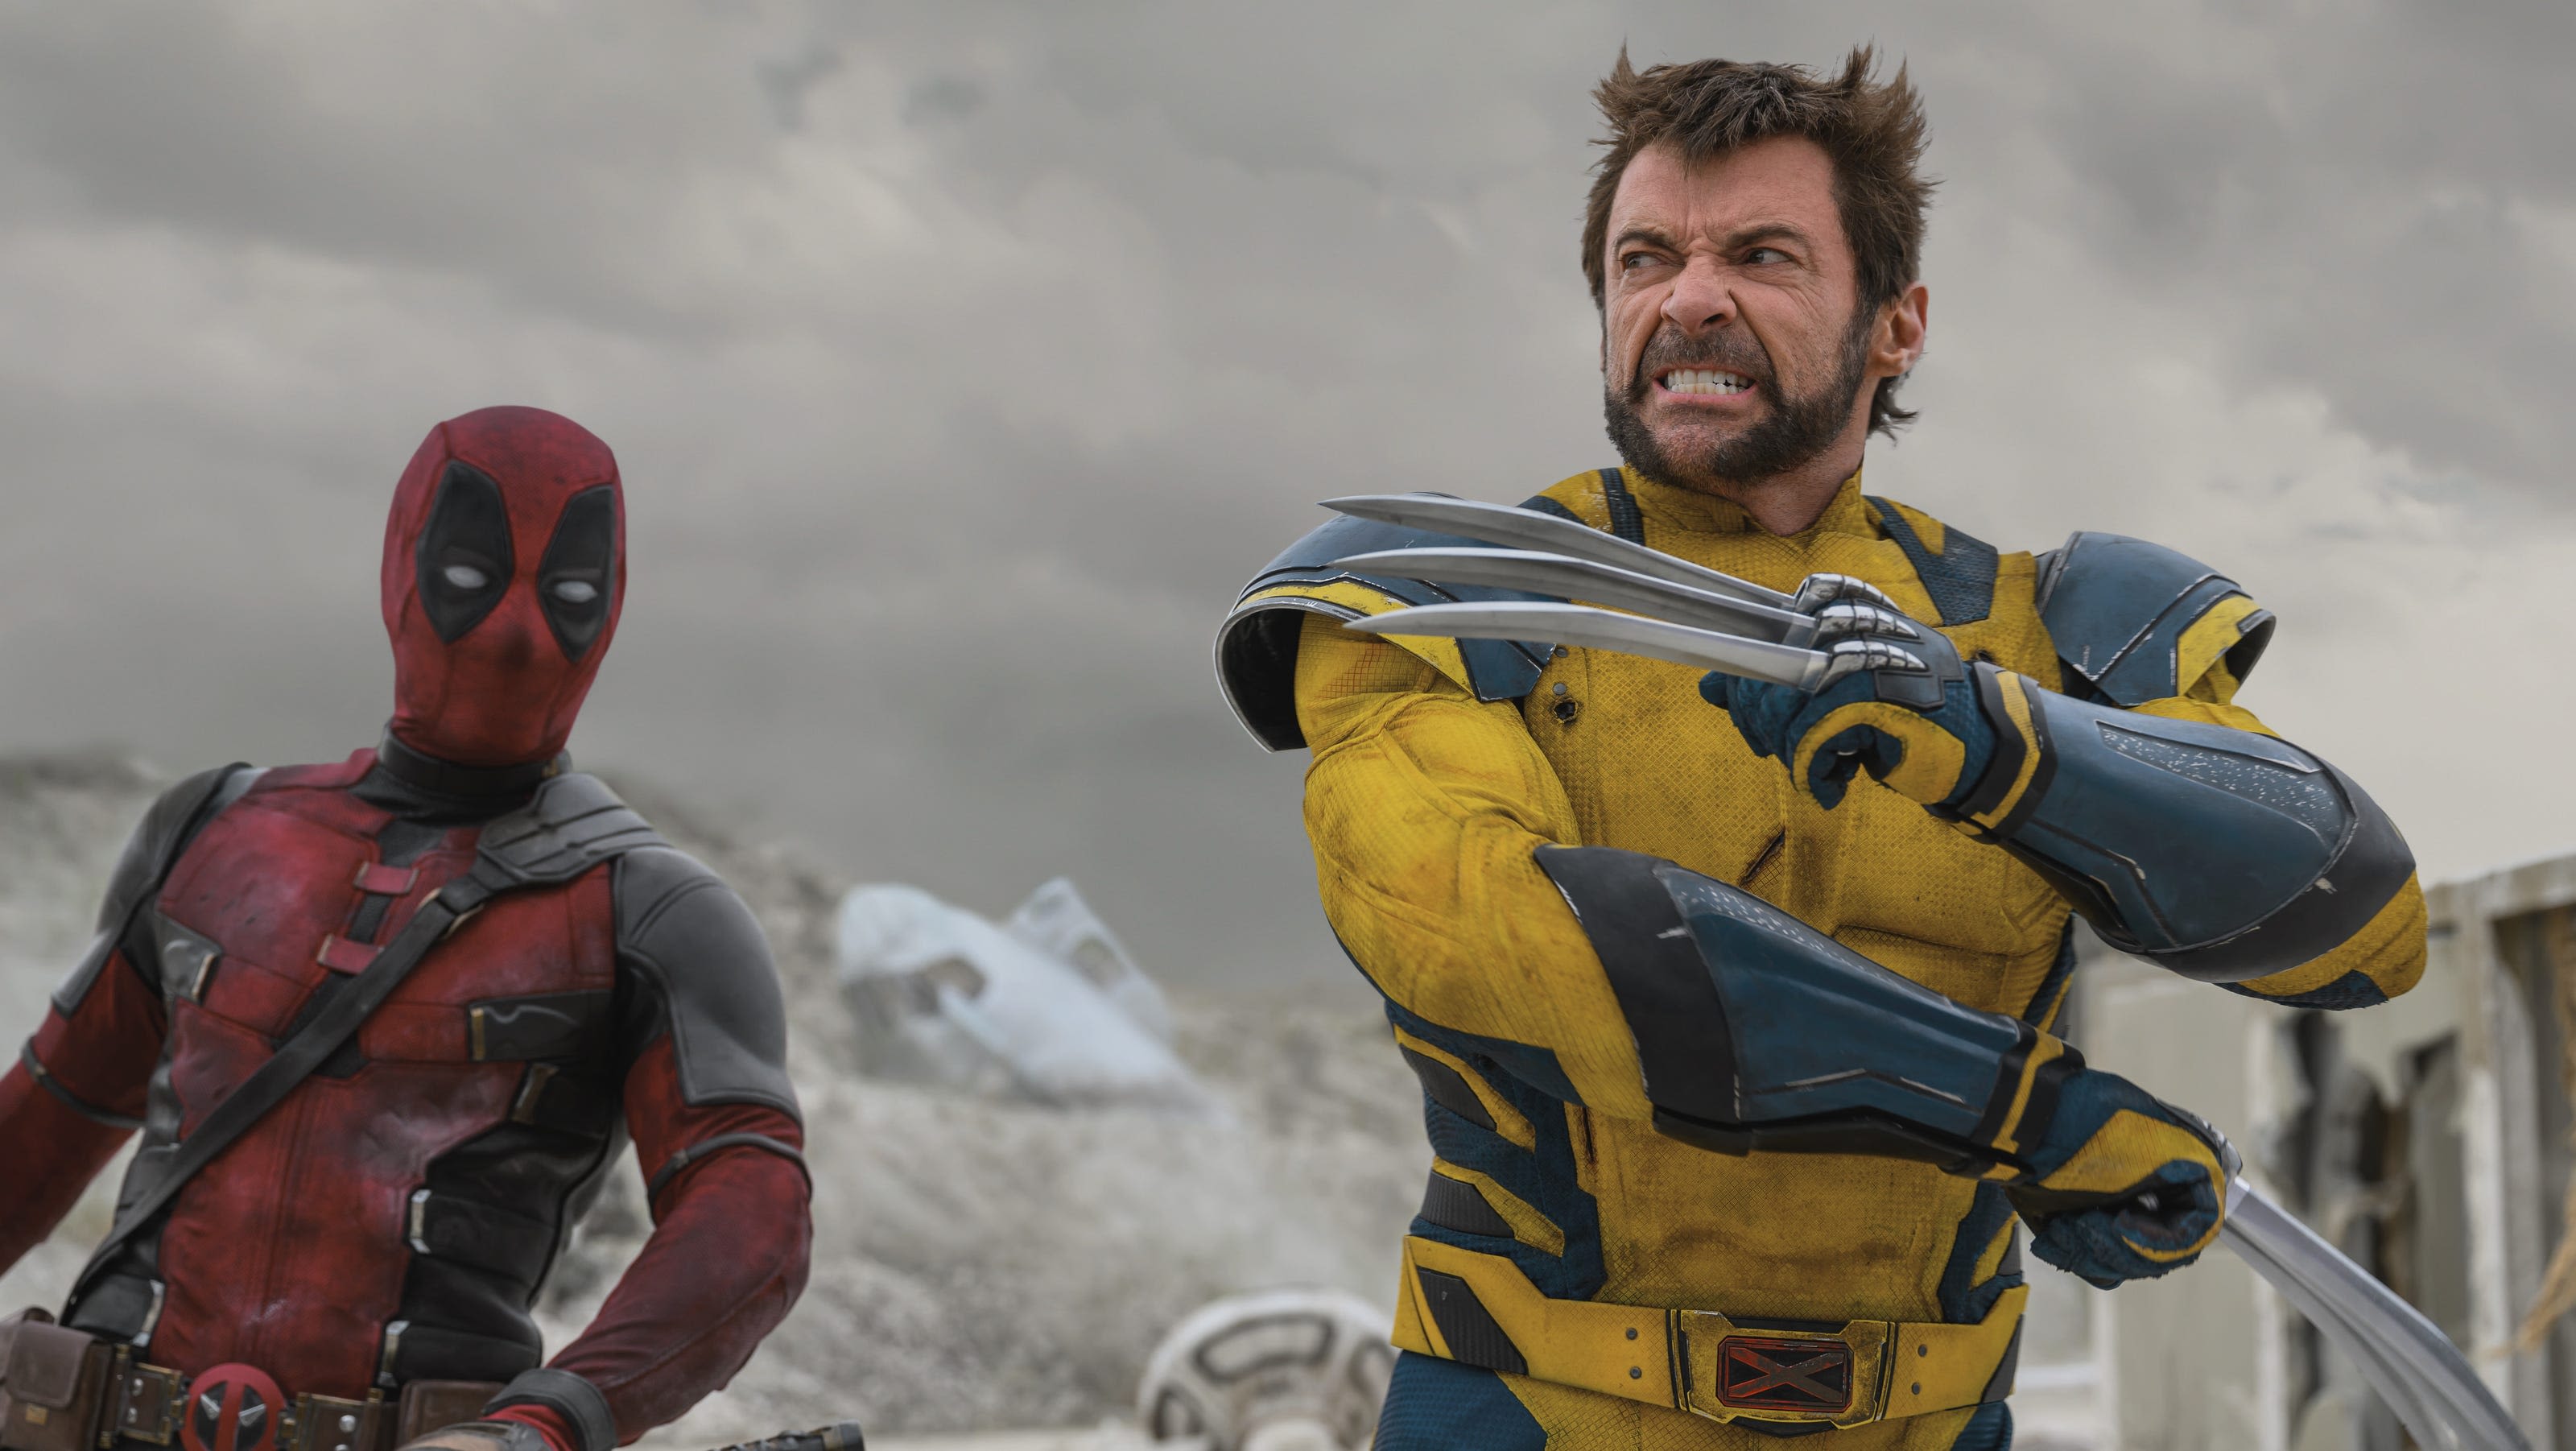 'Deadpool & Wolverine' pulverizes a slew of records with $211M opening